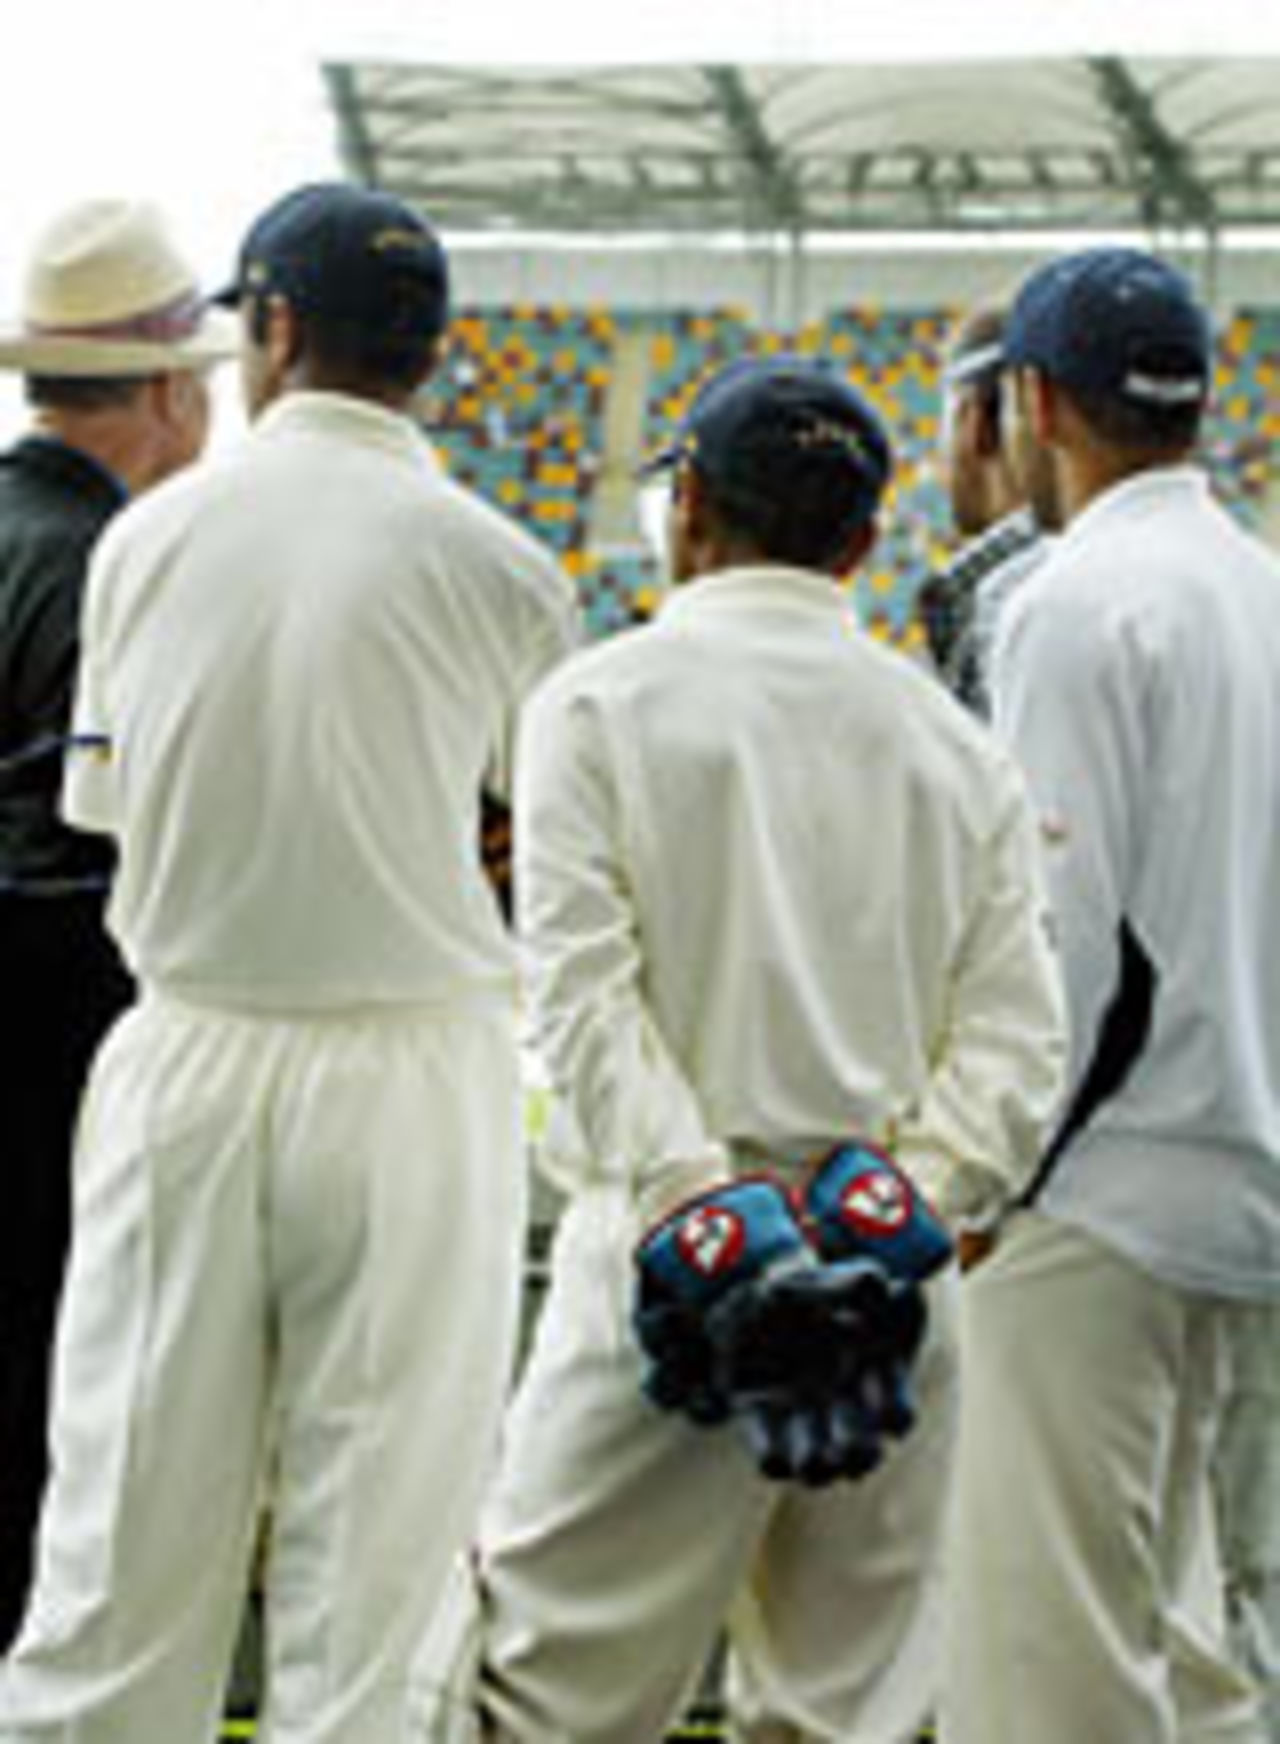 Indian players wait for the rain to stop, Australia v India, 1st Test, Brisbane, December 6, 2003